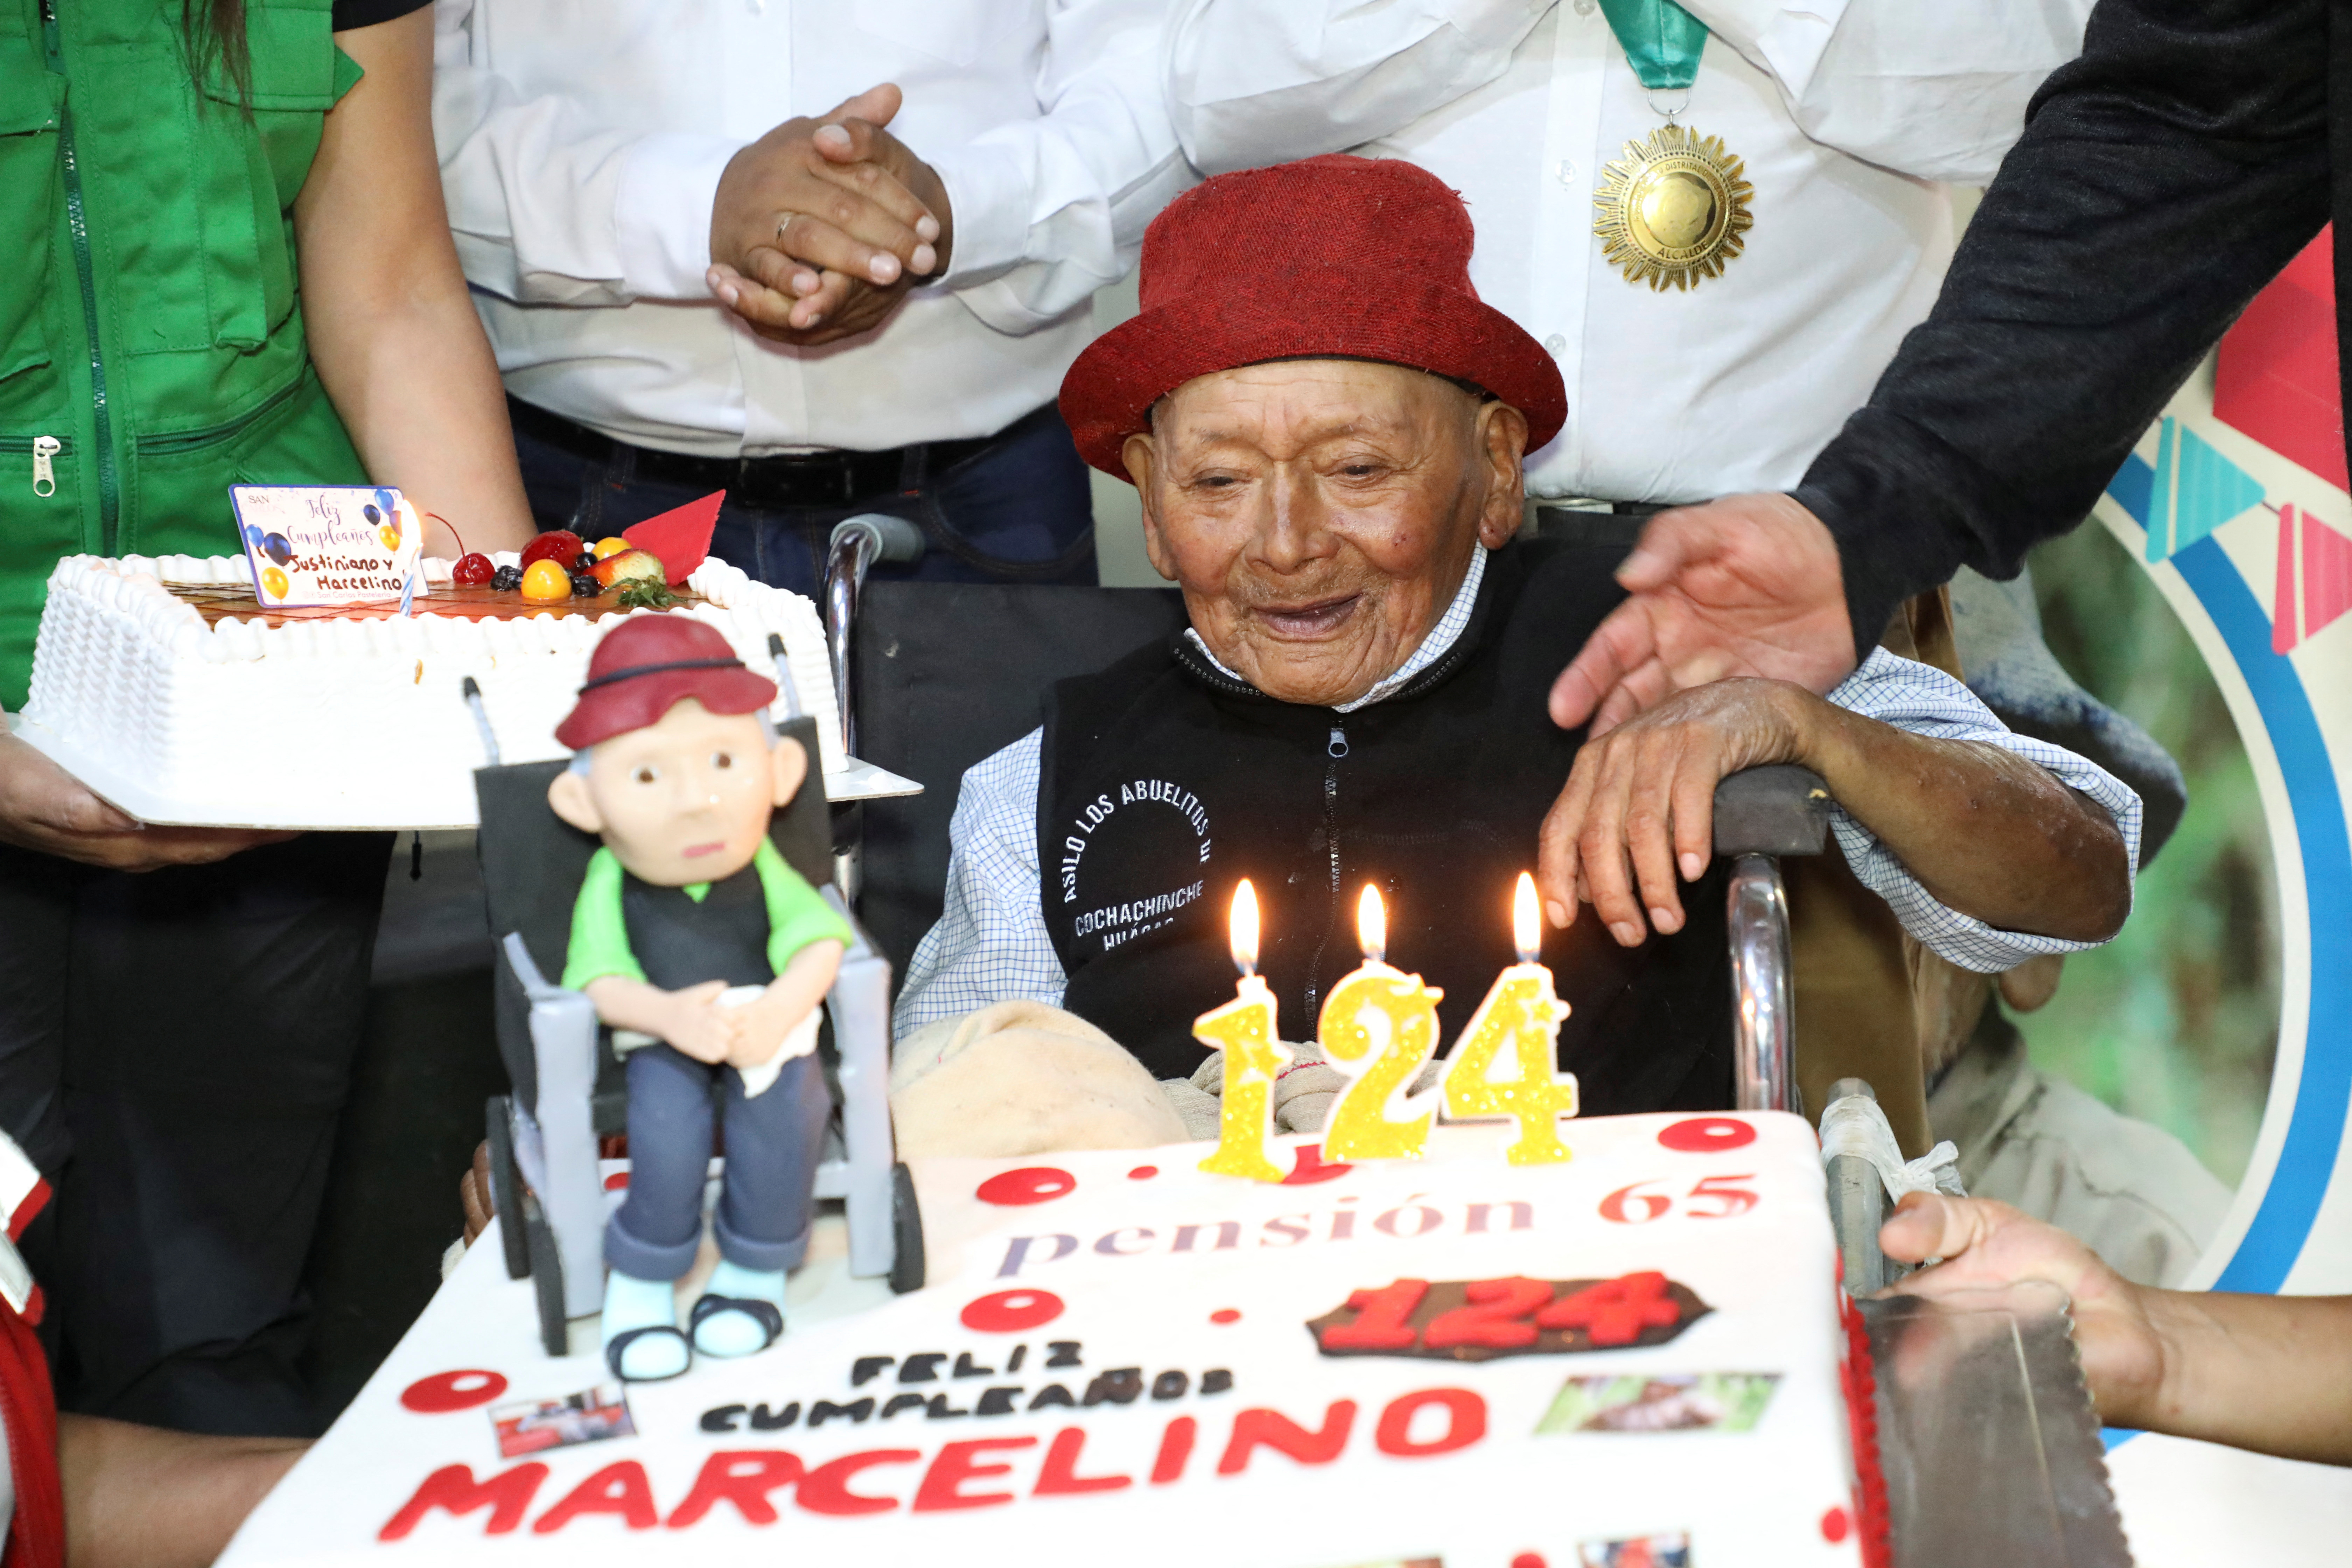 Peru stakes claim to world's oldest human, born in 1900